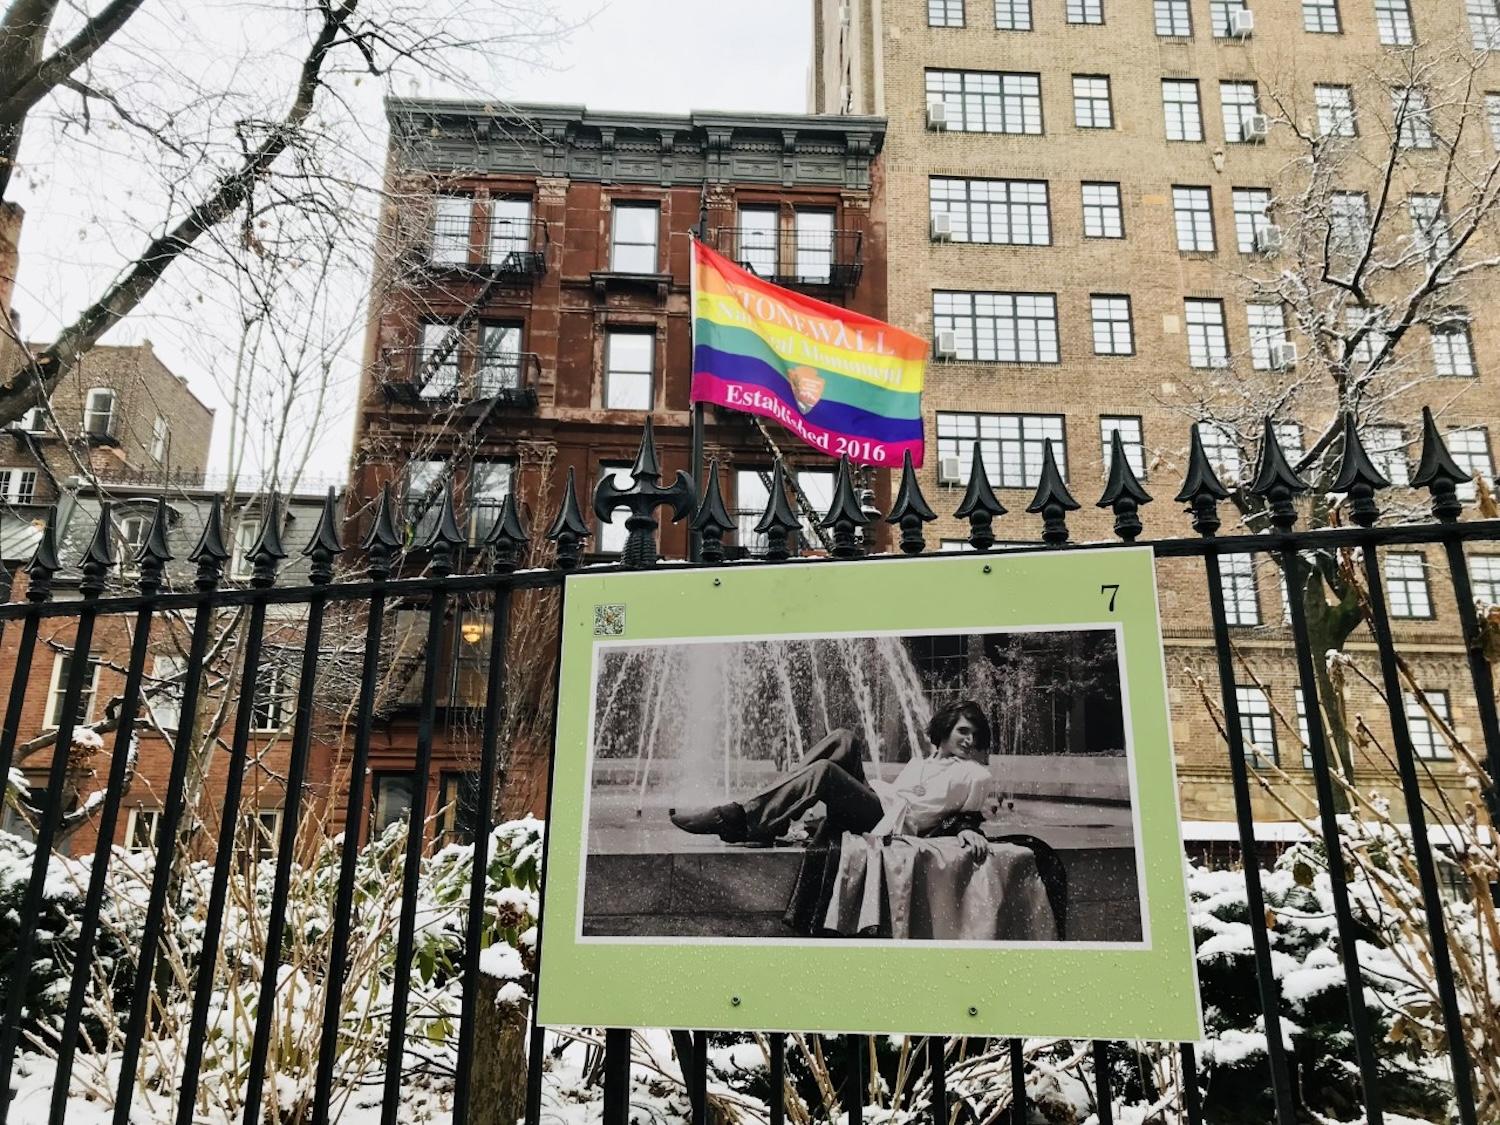 One of the historical photos shown in a fence exhibit at Stonewall National Monument.